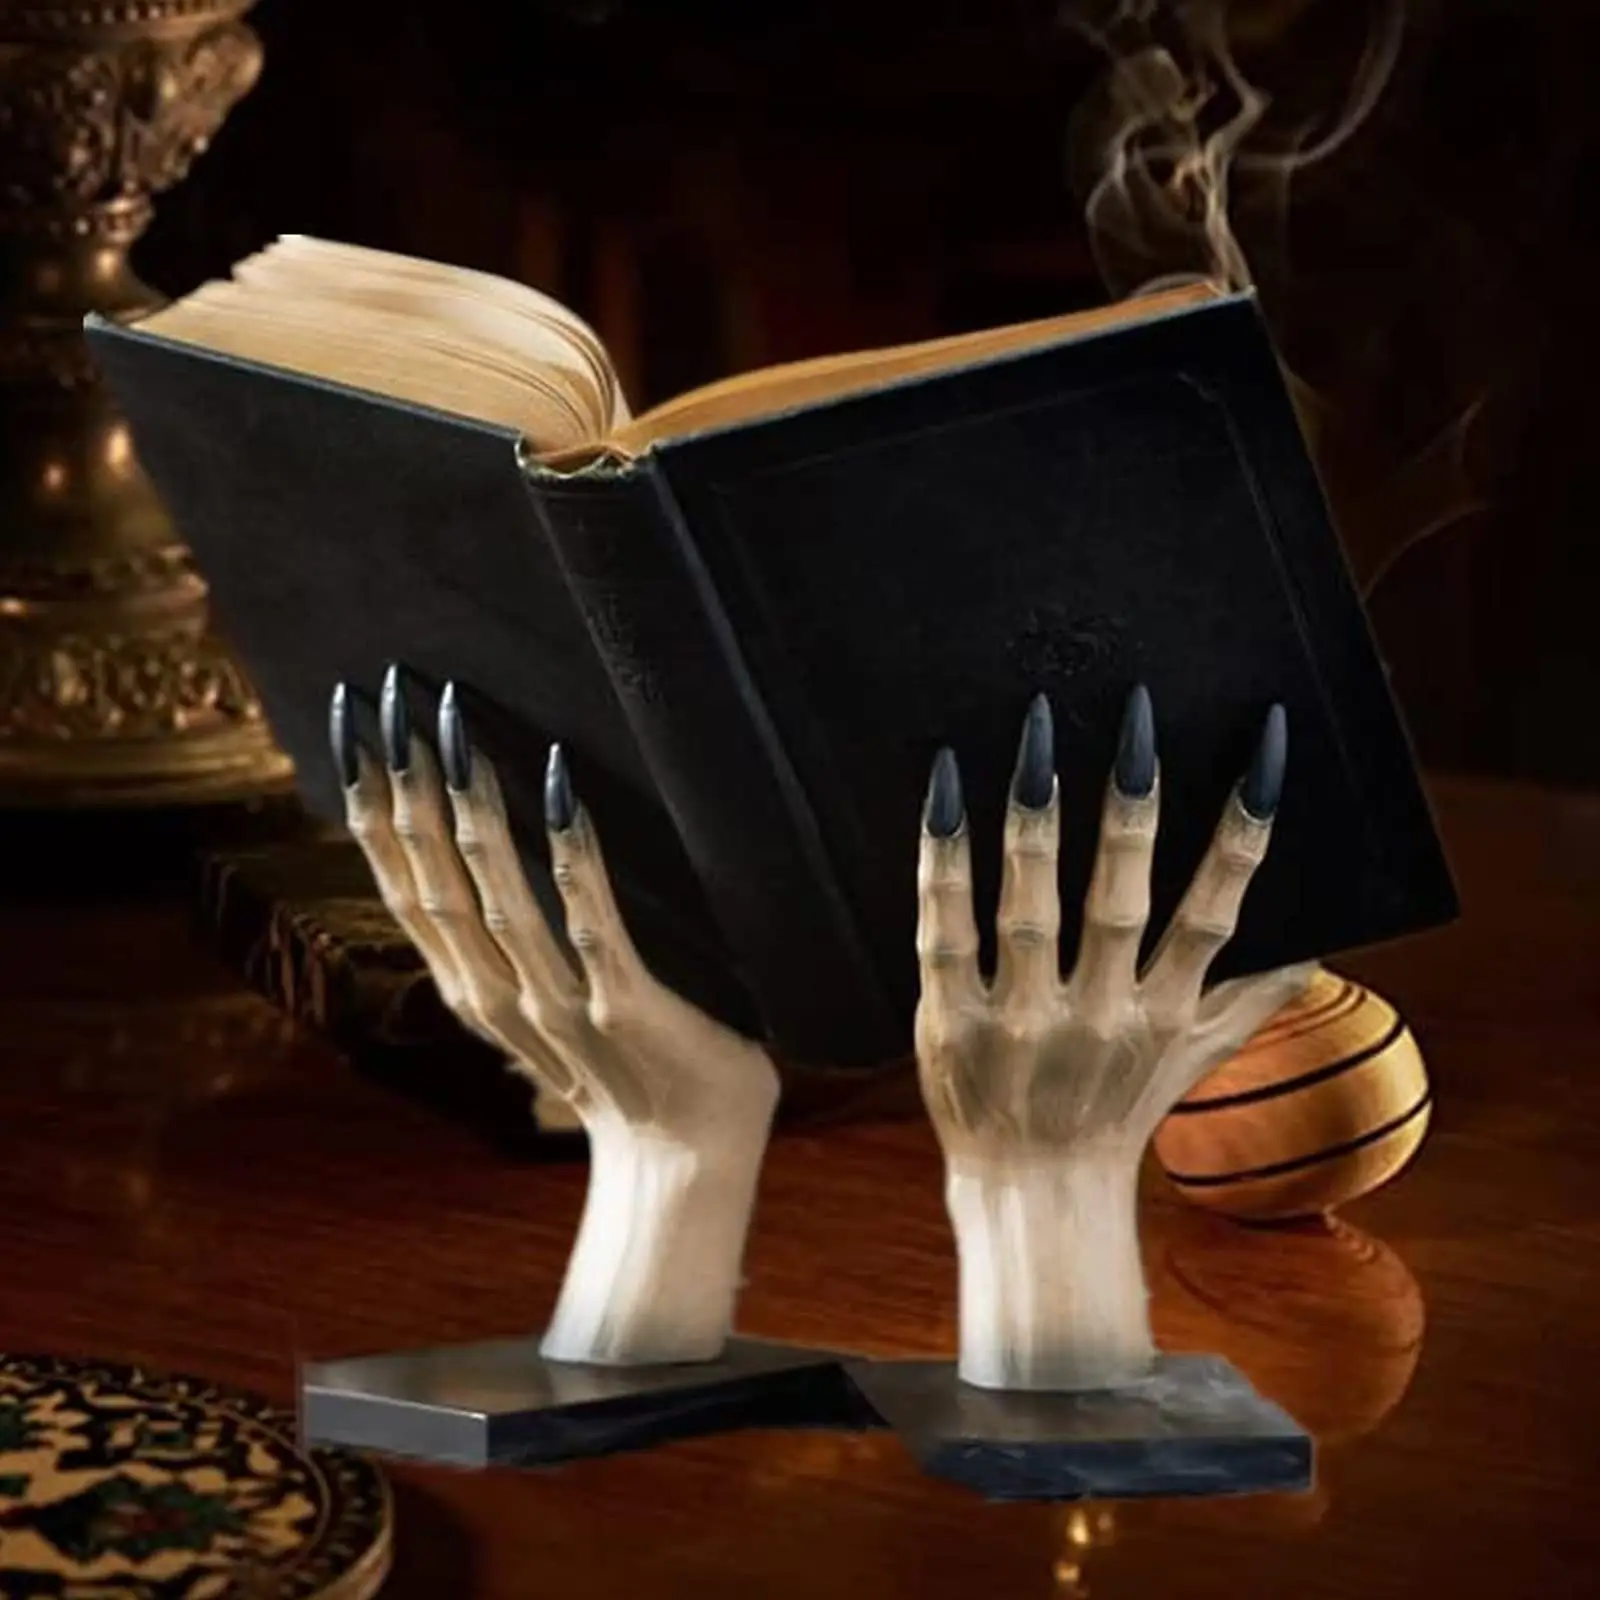 Halloween Bookends Decor Gothic Home Decor Bookends Shelves Unique Scary Monster Hand Book Ends Spooky Halloween Room Decor metal hollow desktop organizer bookends book ends support stand holder shelf bookrack home office supplies